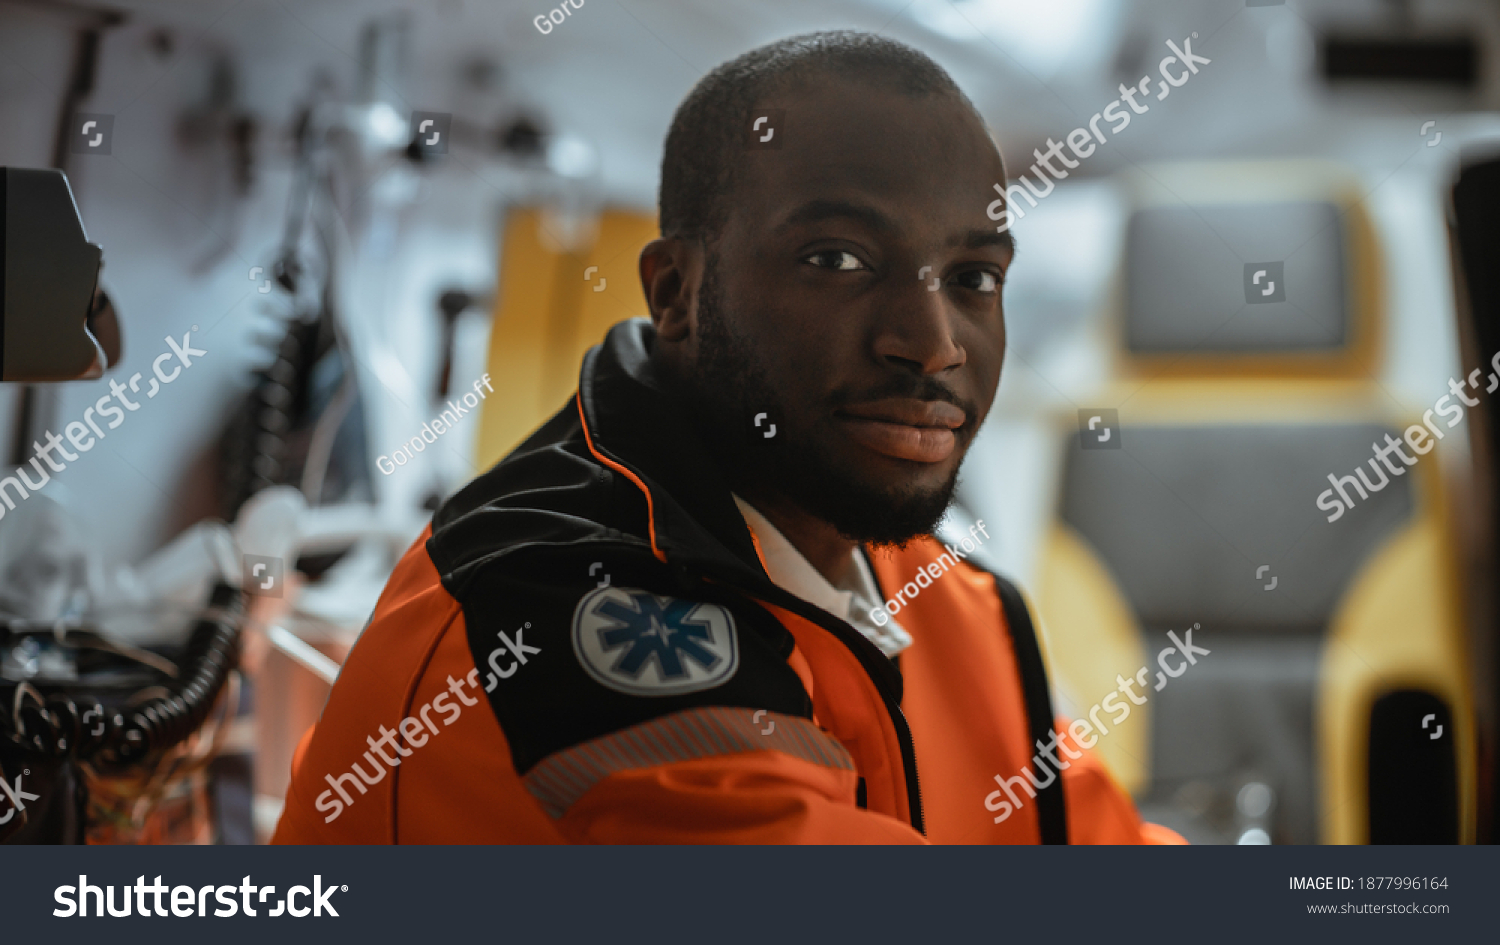 Black African American Paramedic Looking into Camera in an Ambulance Vehicle Going for Emergency. Emergency Medical Technicians are on Their Way to a Call Outside the Healthcare Hospital. #1877996164